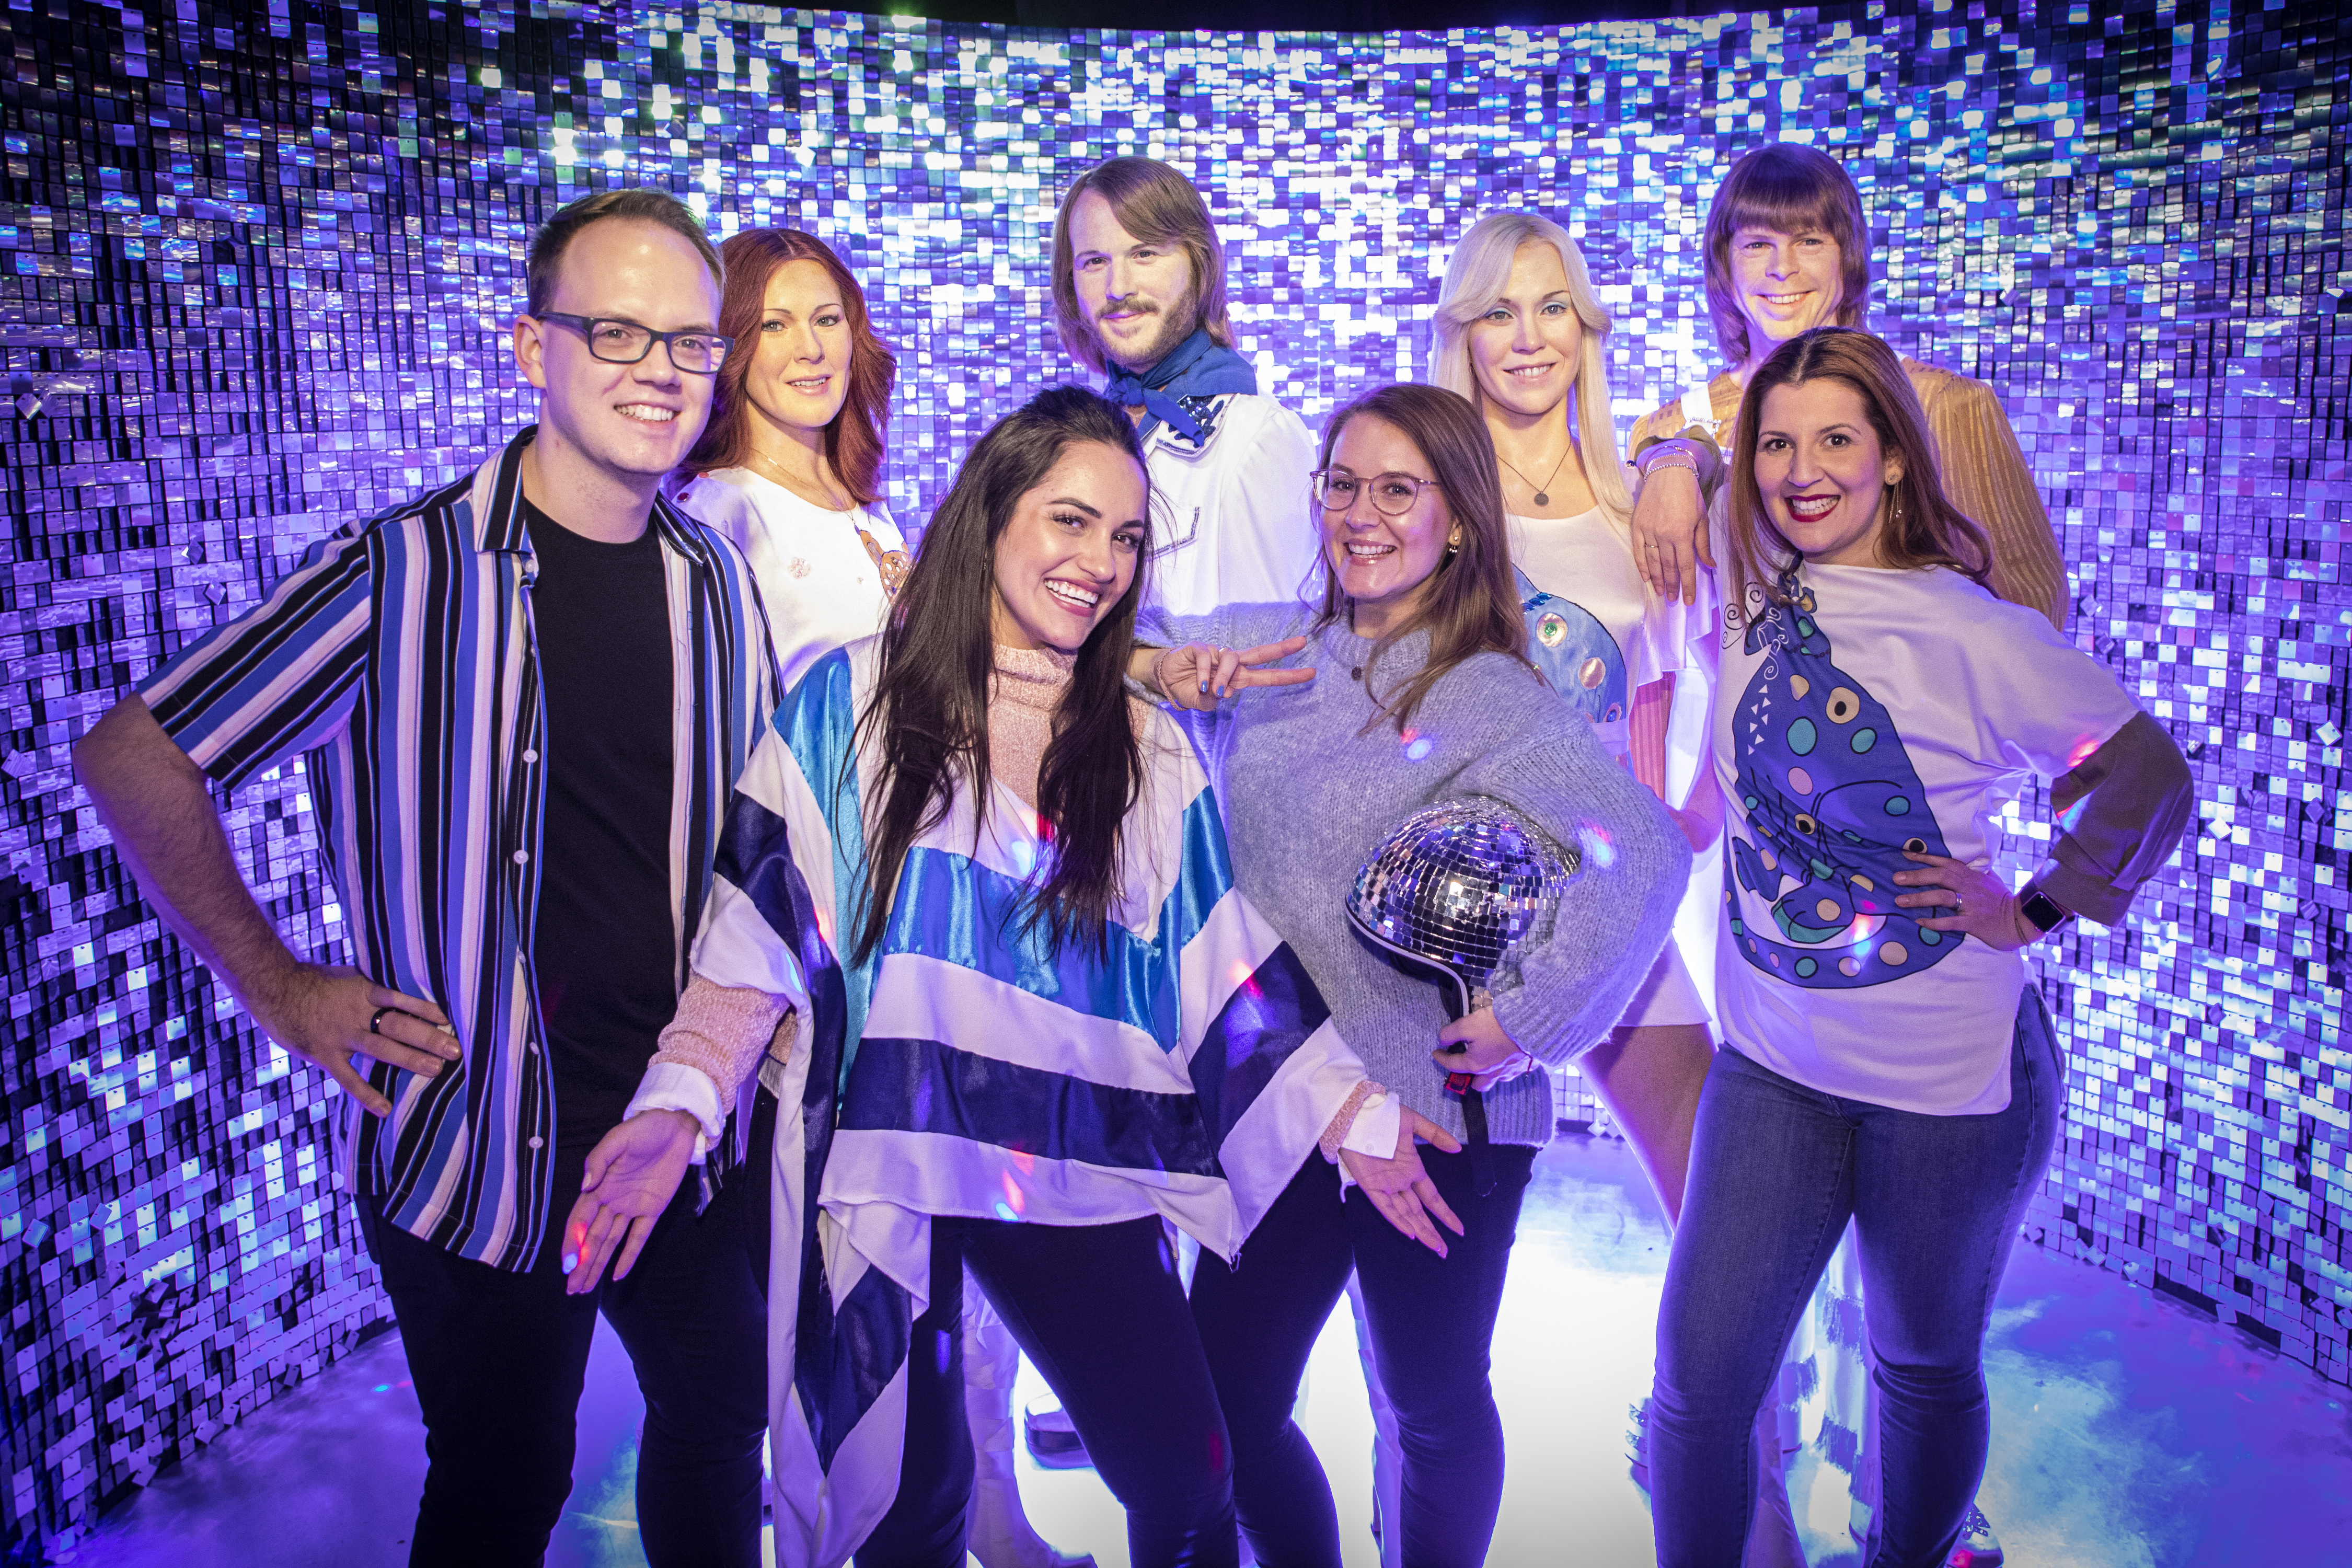 Meet the cult band ABBA at Madame Tussauds Berlin